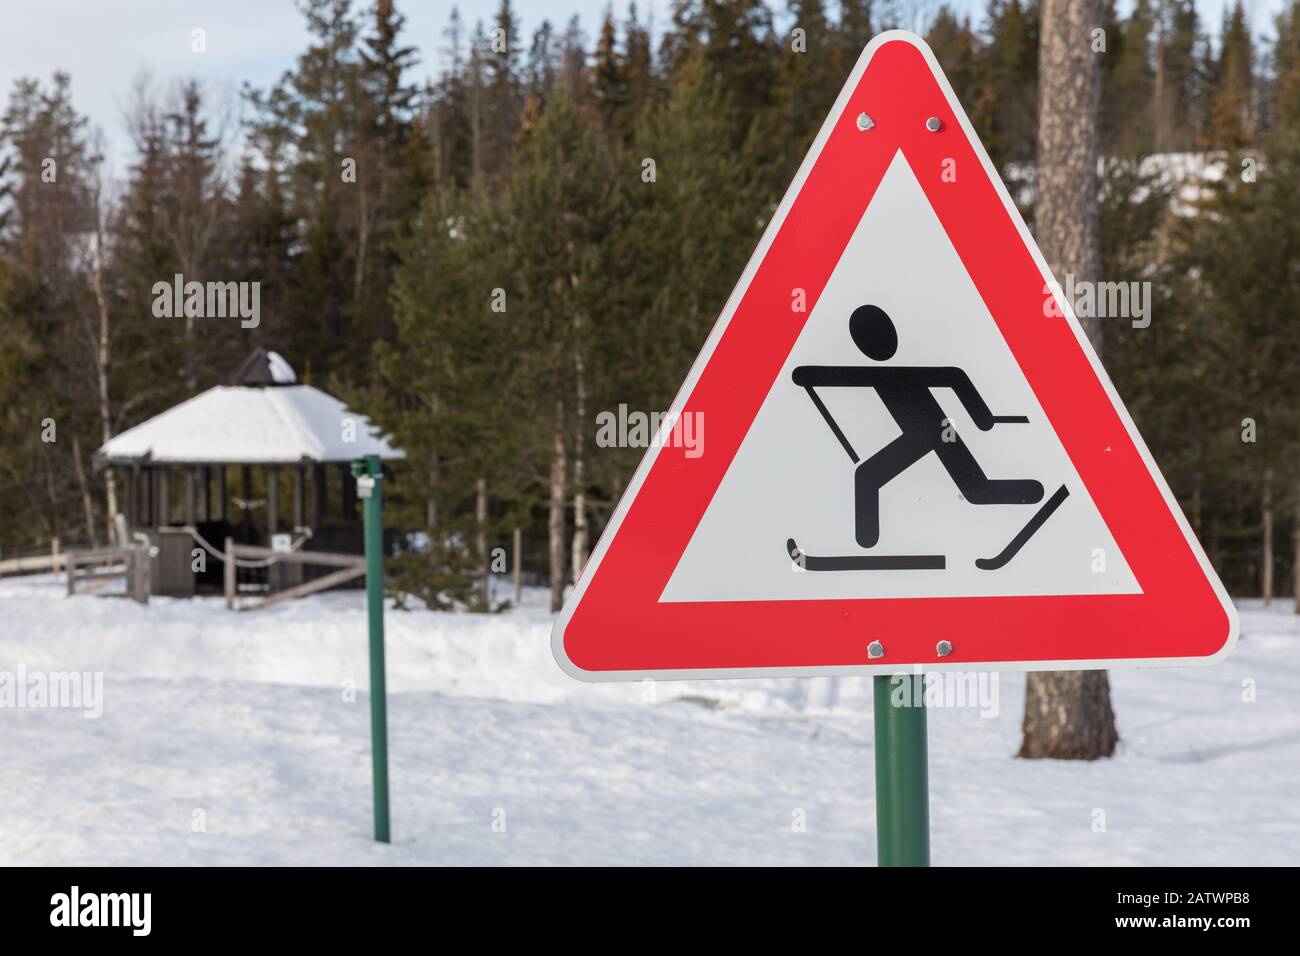 Warning sign for cross country skiers in Norway Stock Photo